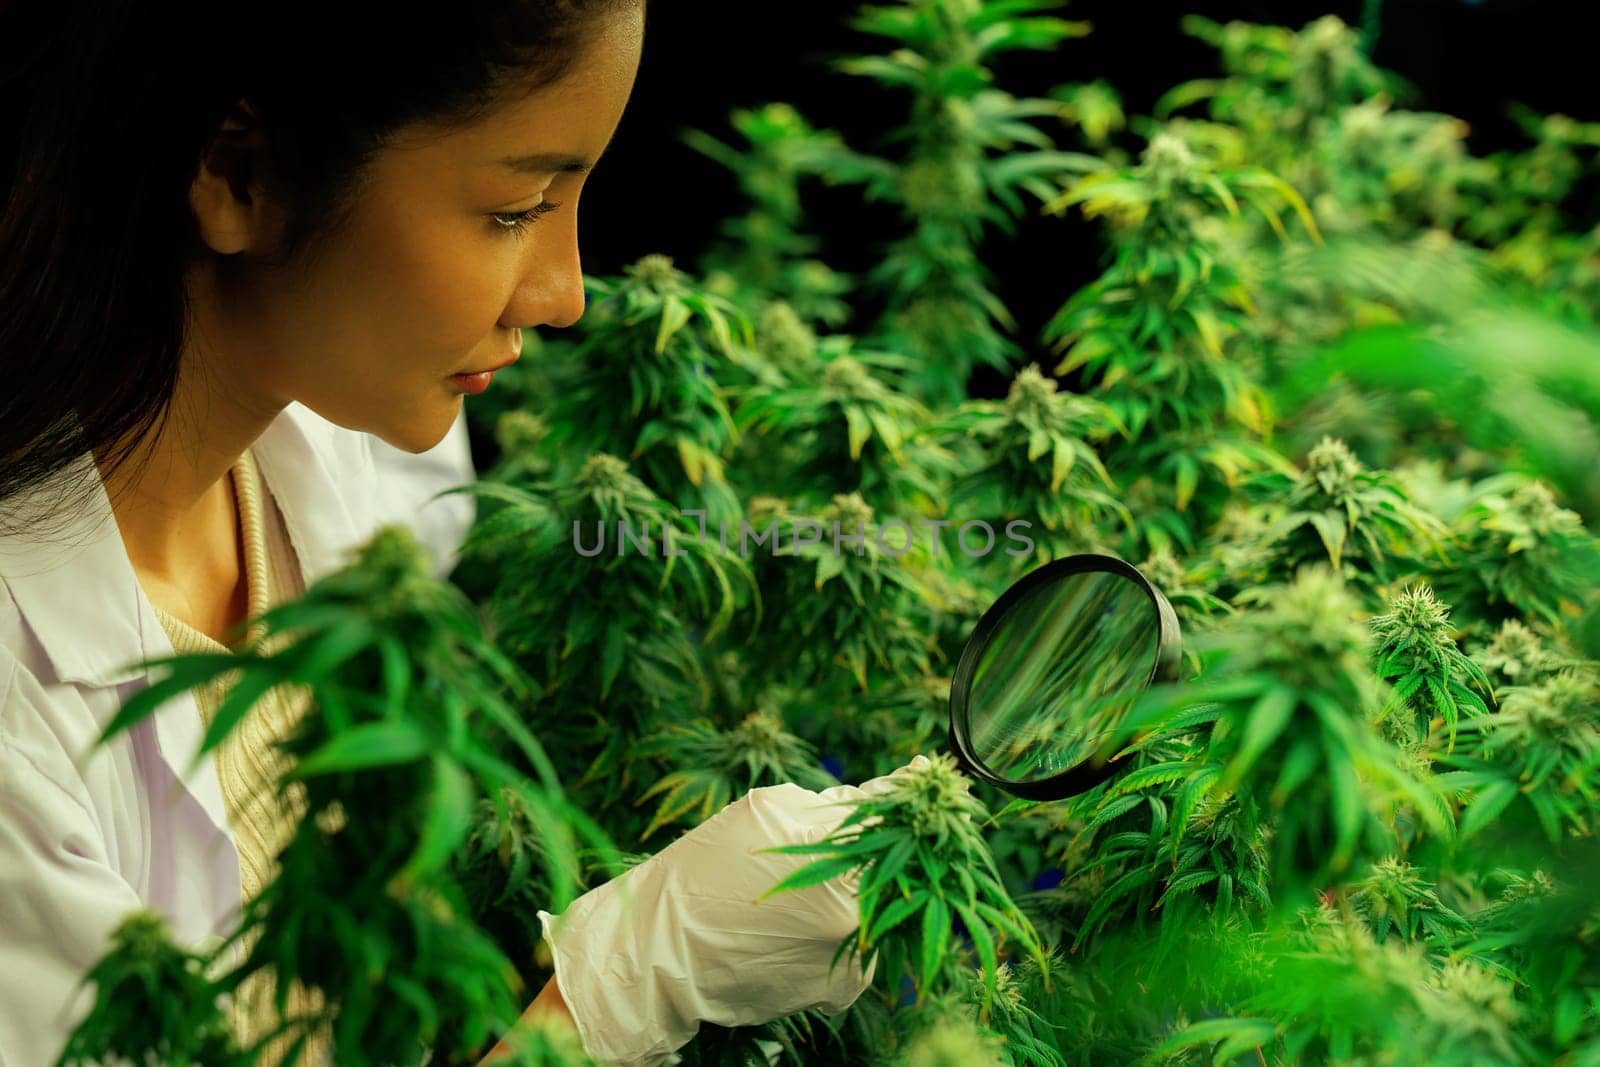 Female scientist inspects gratifying buds on cannabis plant using a magnifying glass. Cannabis farm in curative grow facility providing high quality of medicinal cannabis products.